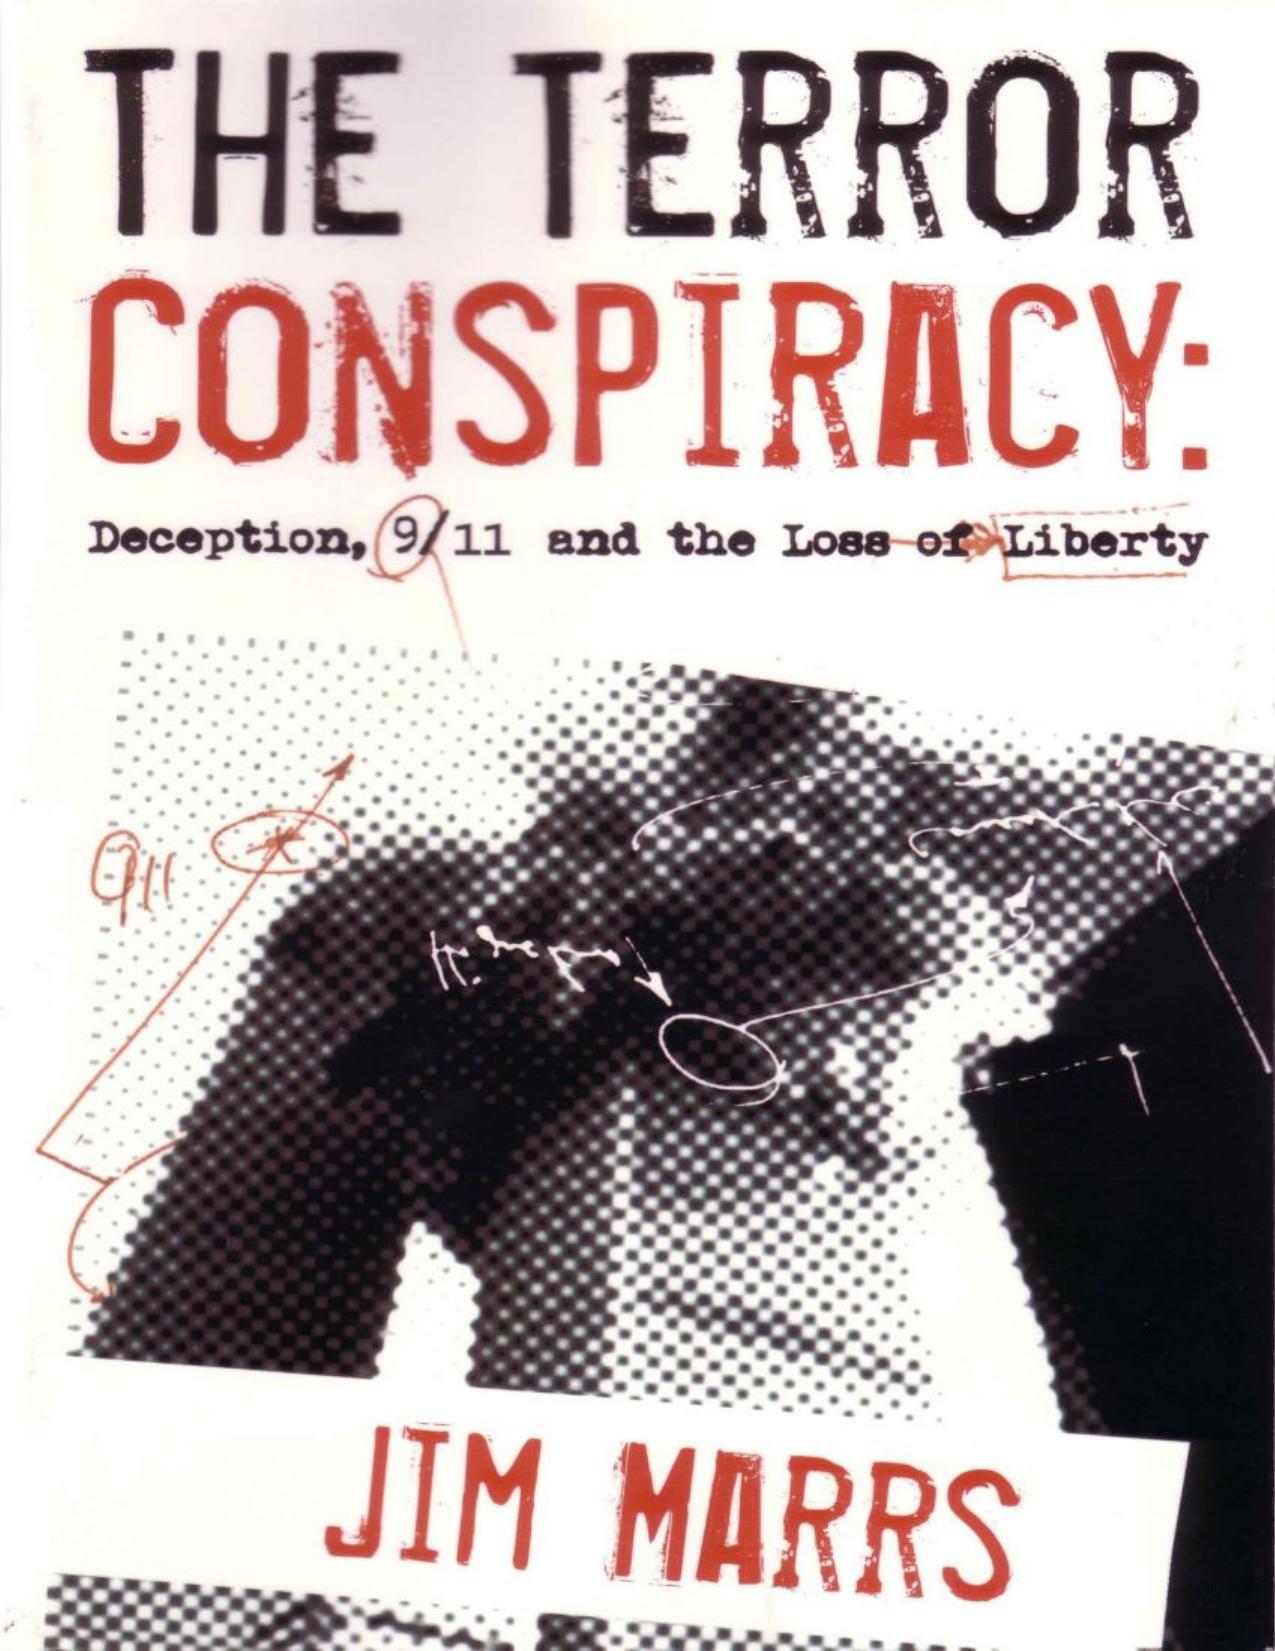 The Terror Conspiracy: Deception, 9;11 and the Loss of Liberty